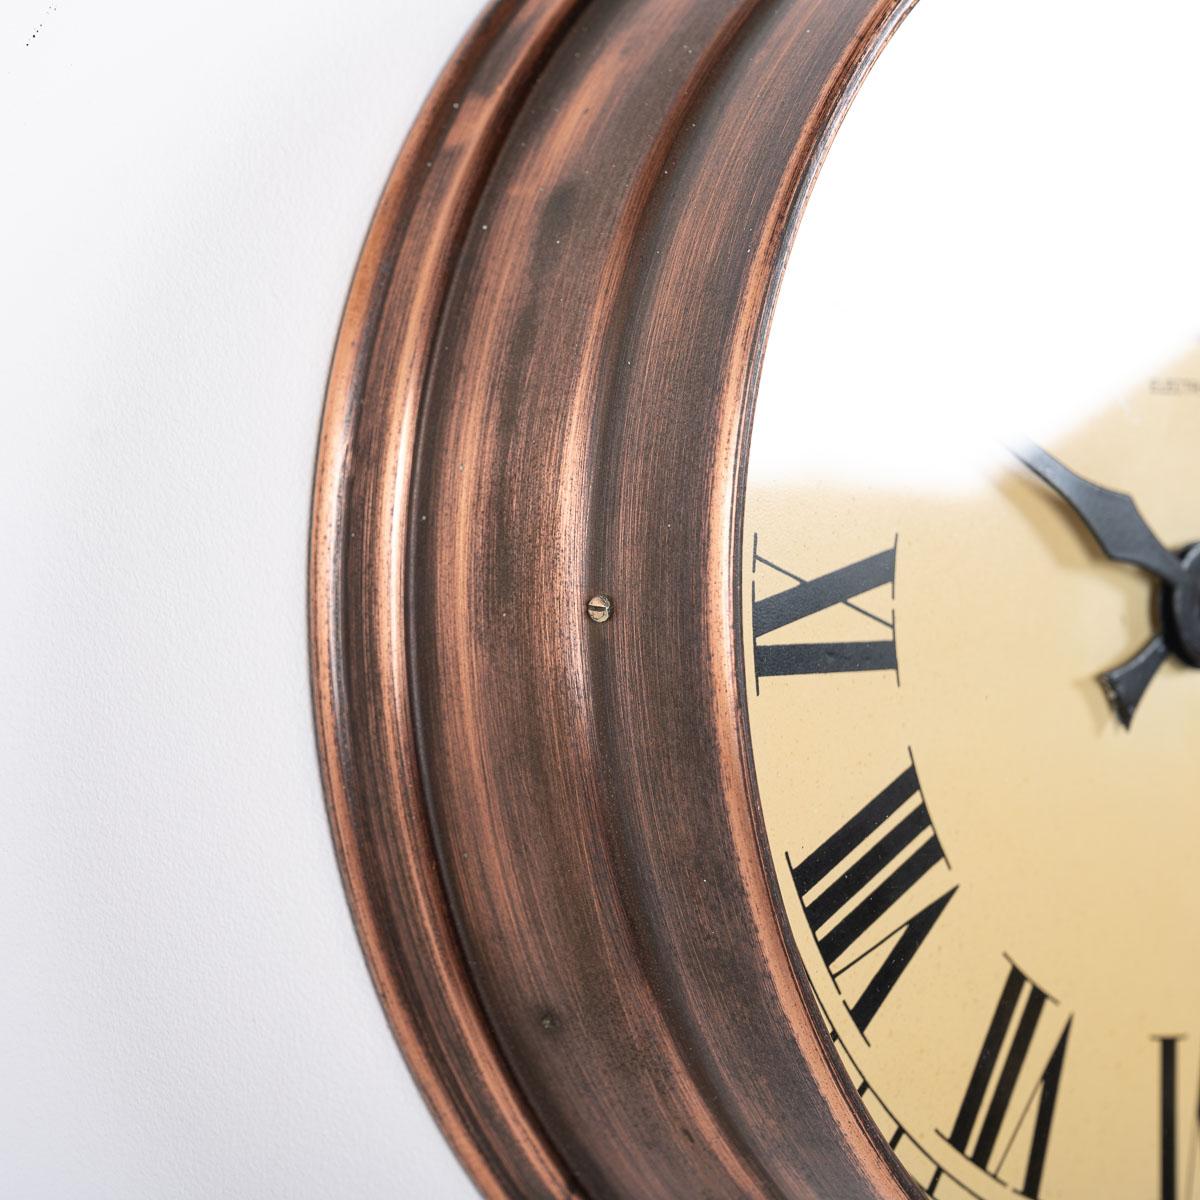 Mid-20th Century Small Antique Industrial Copper Wall Clock by Synchronome